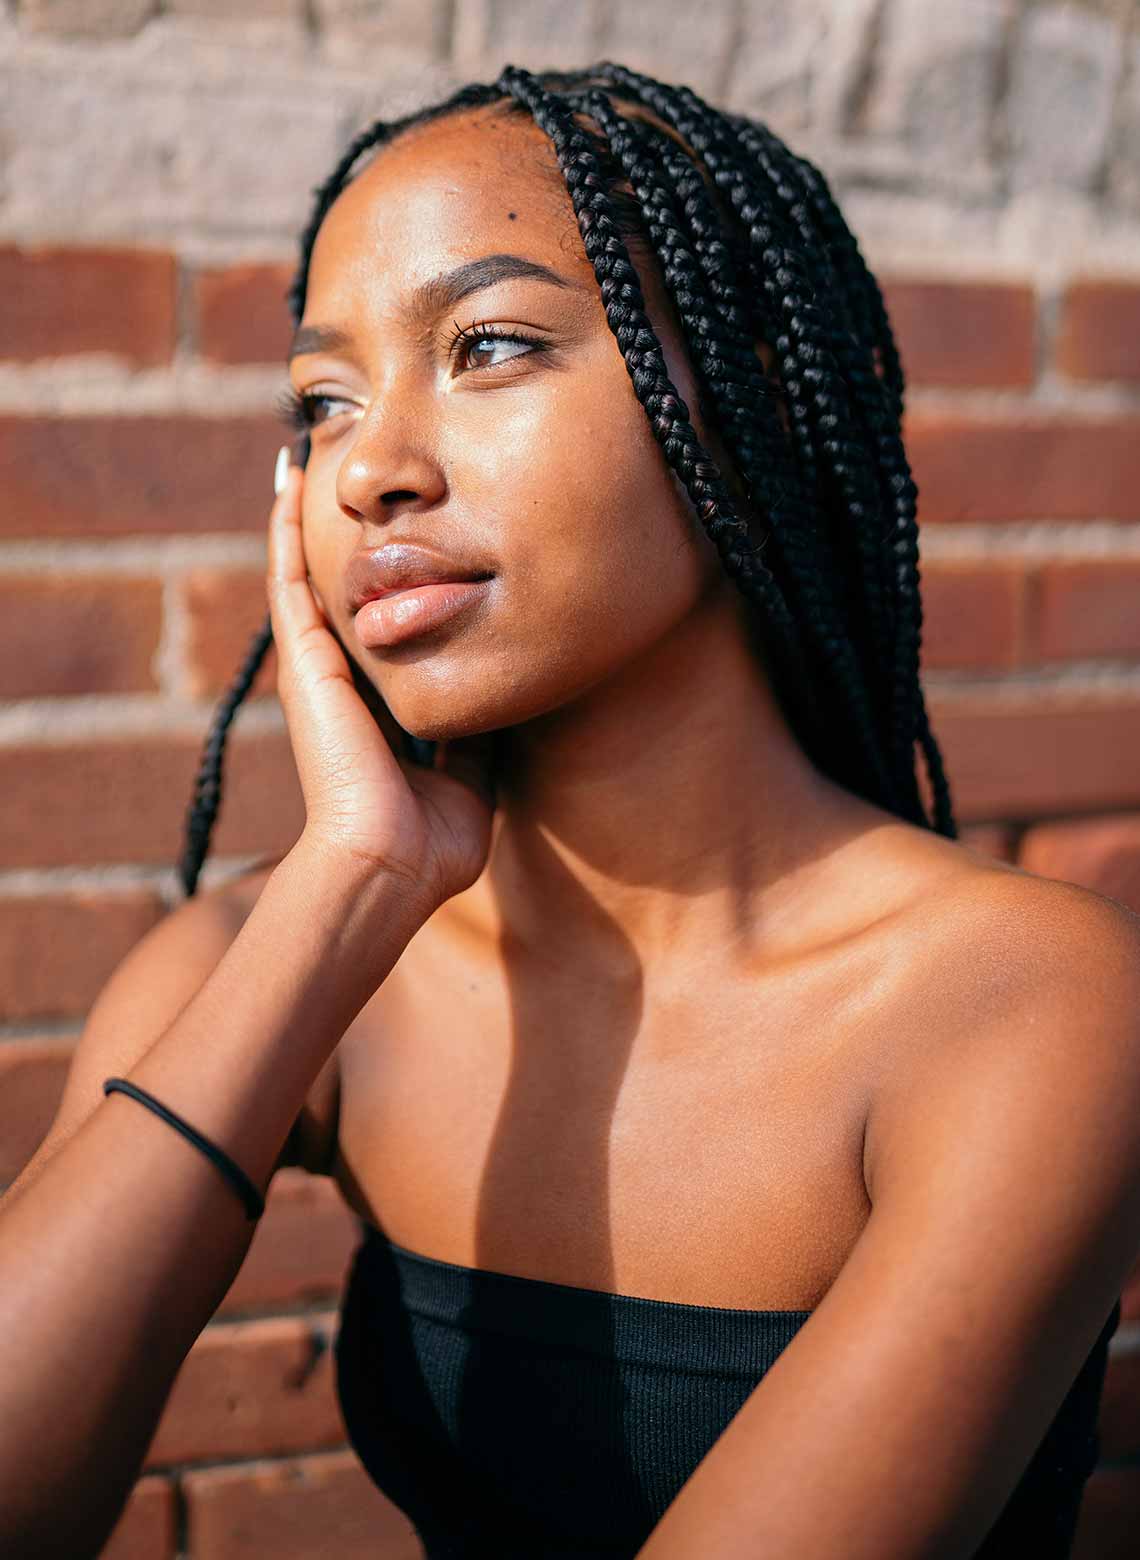 person wearing a black tube top, black hair tie around their arm, long medium box braids, and their hand on their face while looking to the side